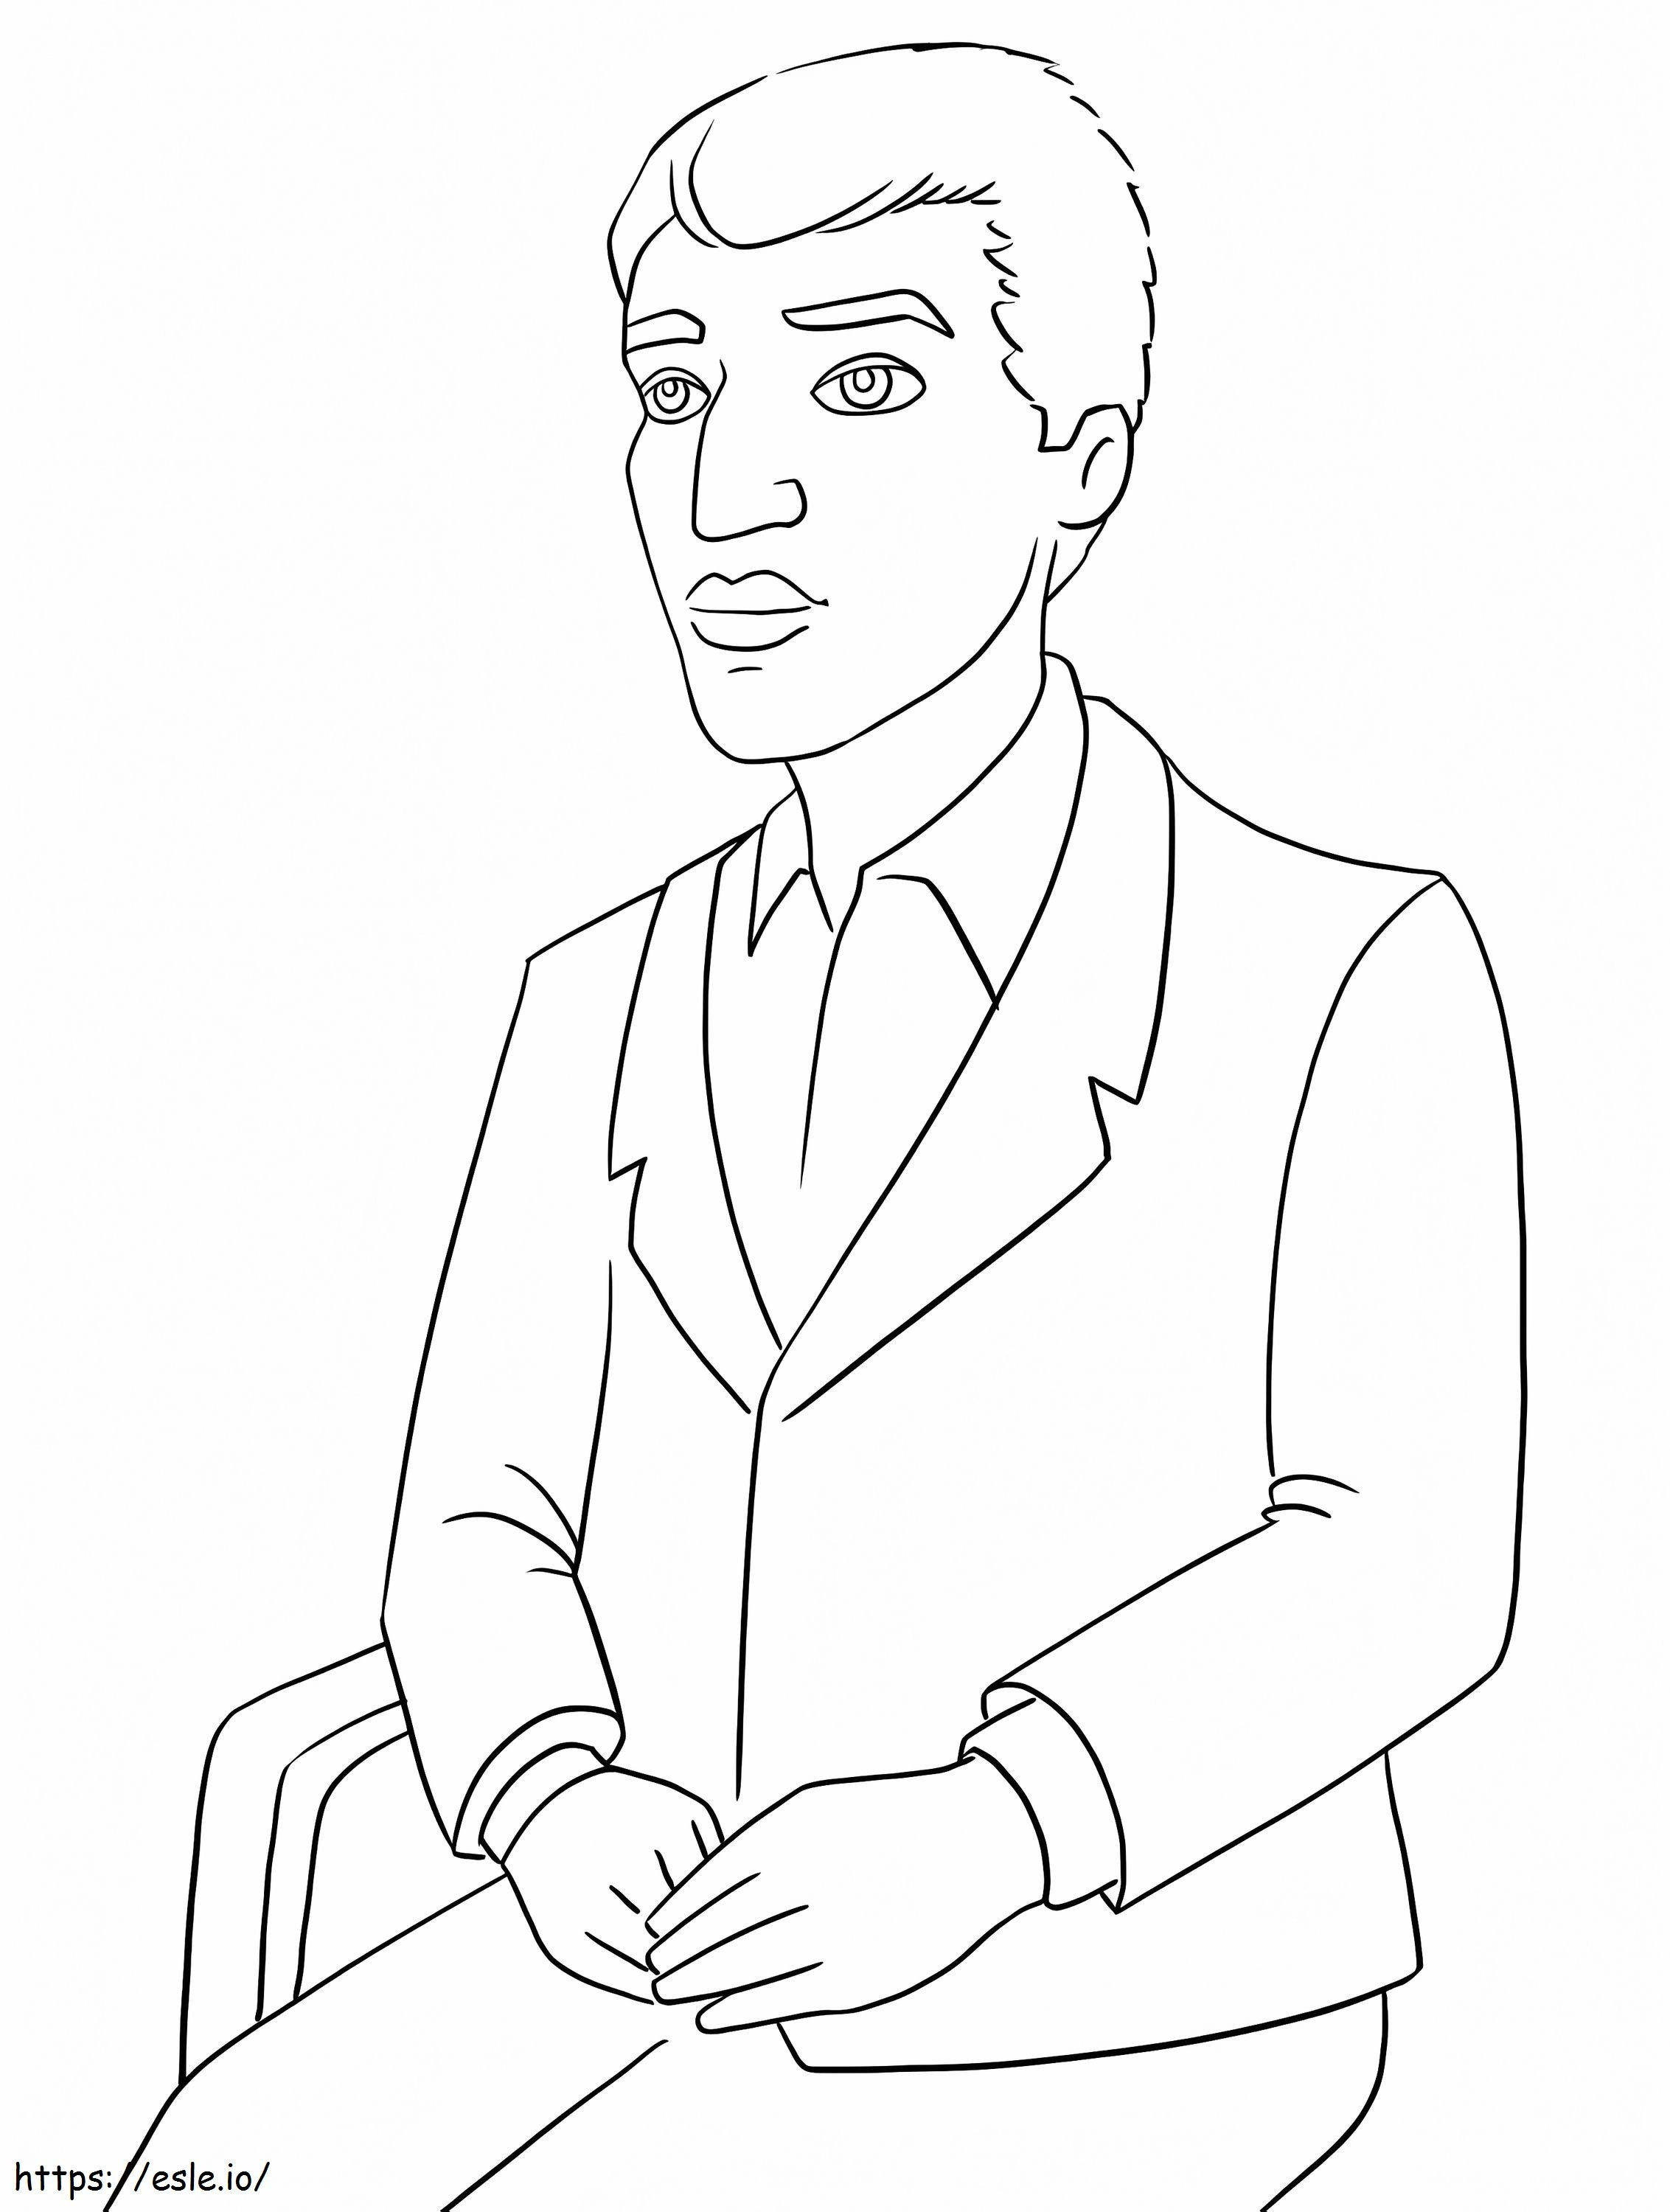 Andrew Jackson 2 coloring page